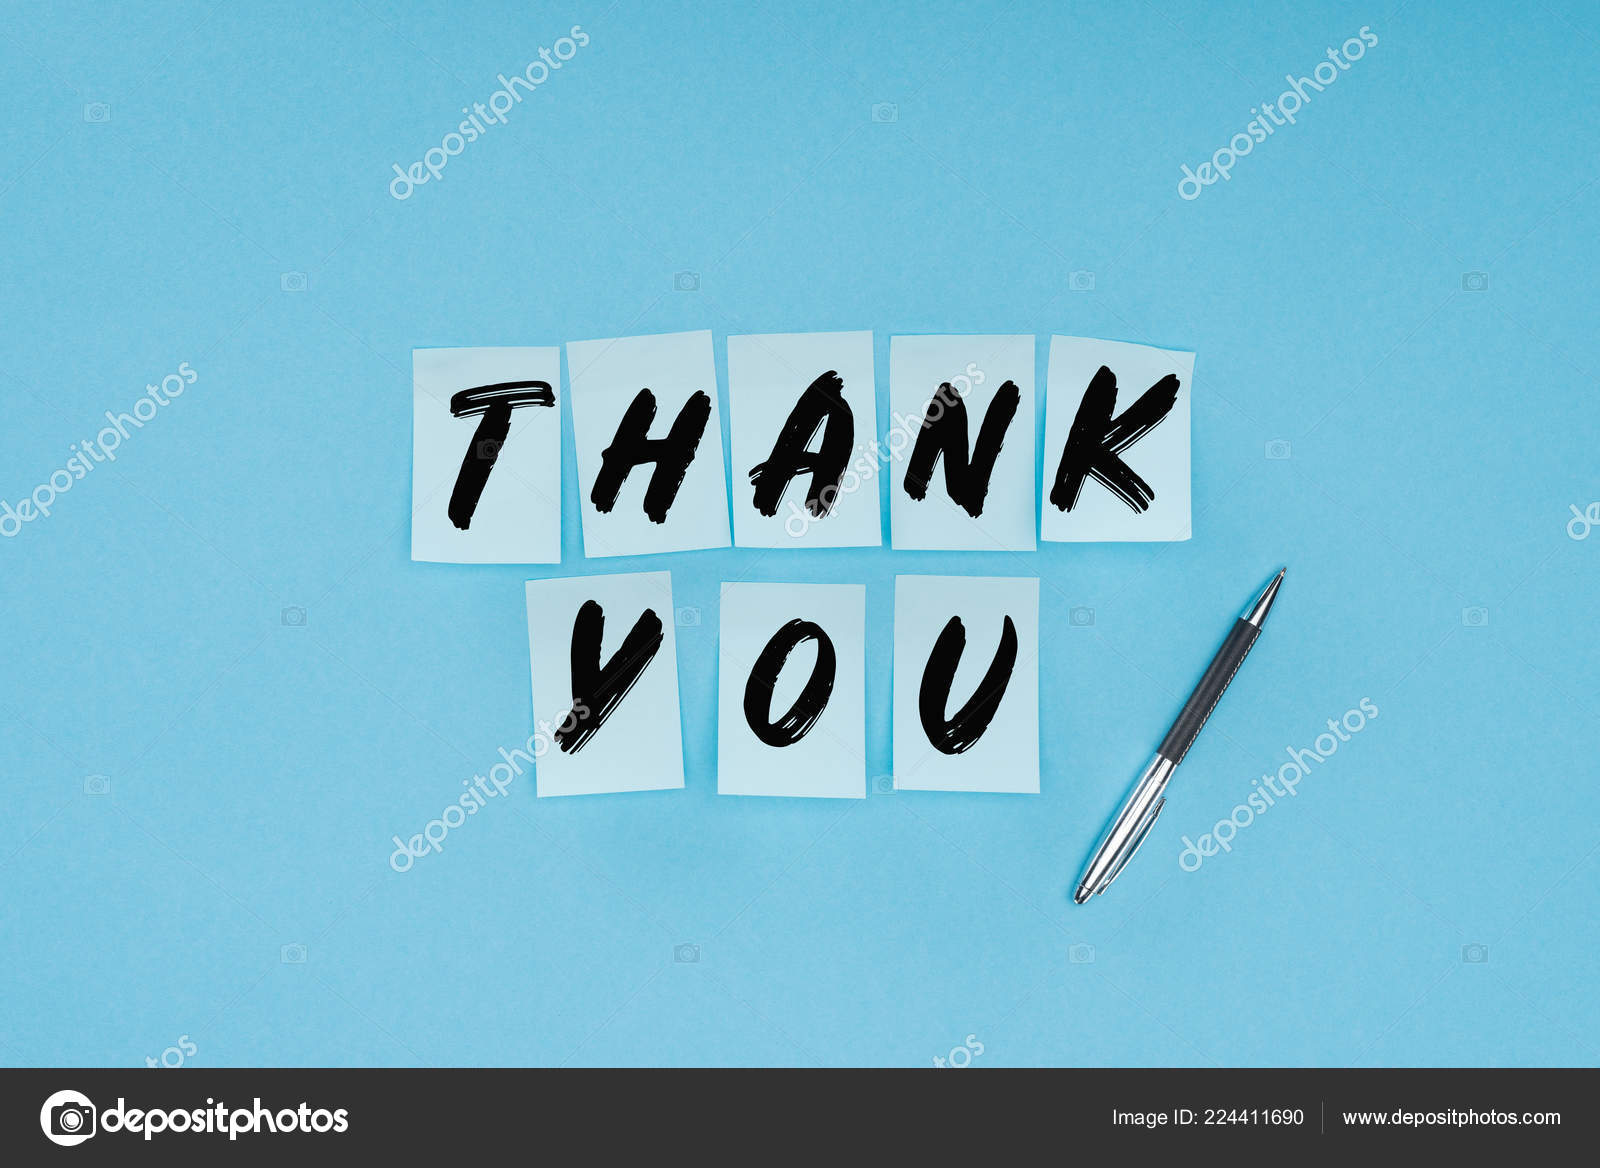 Thank you wording on sticky notes and pen isolated on blue background